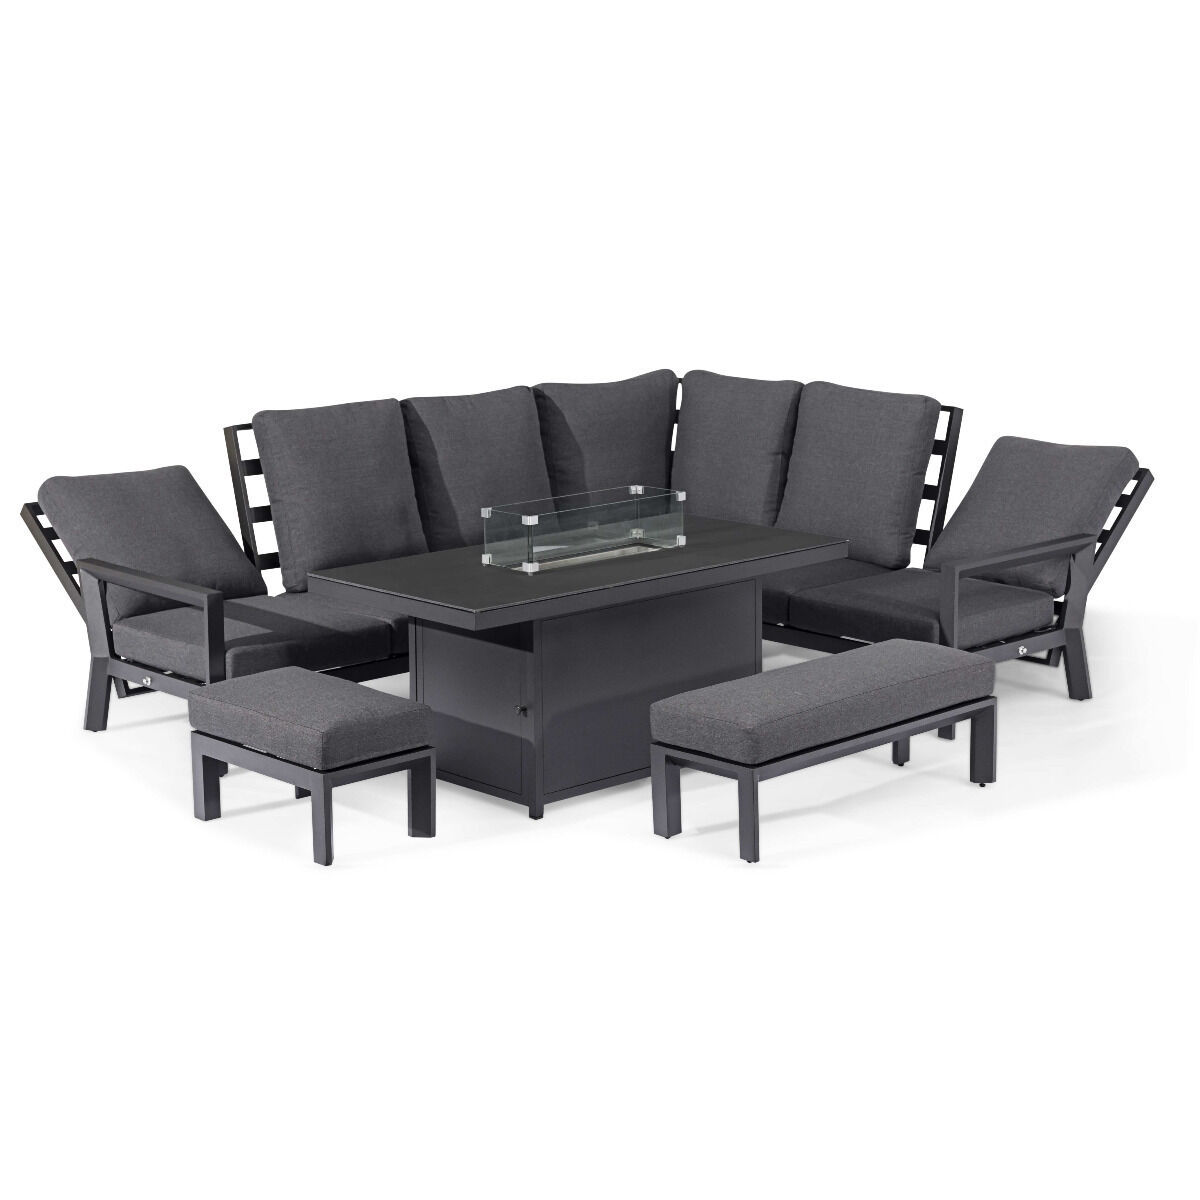 Maze - Manhattan Reclining Aluminium Corner Dining Set with Fire Pit Table product image